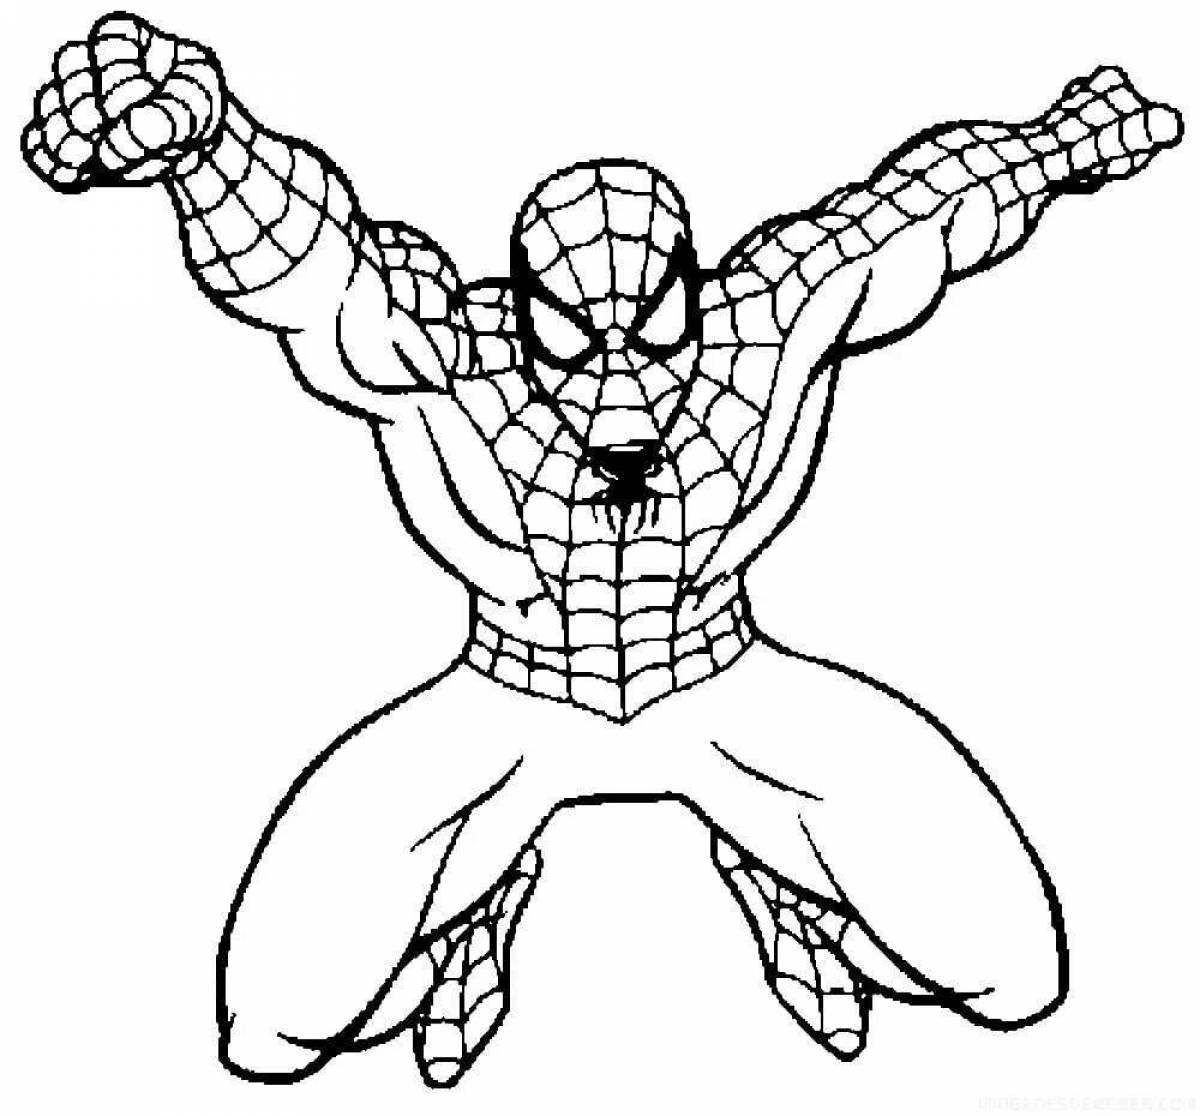 Spider-man playful coloring book